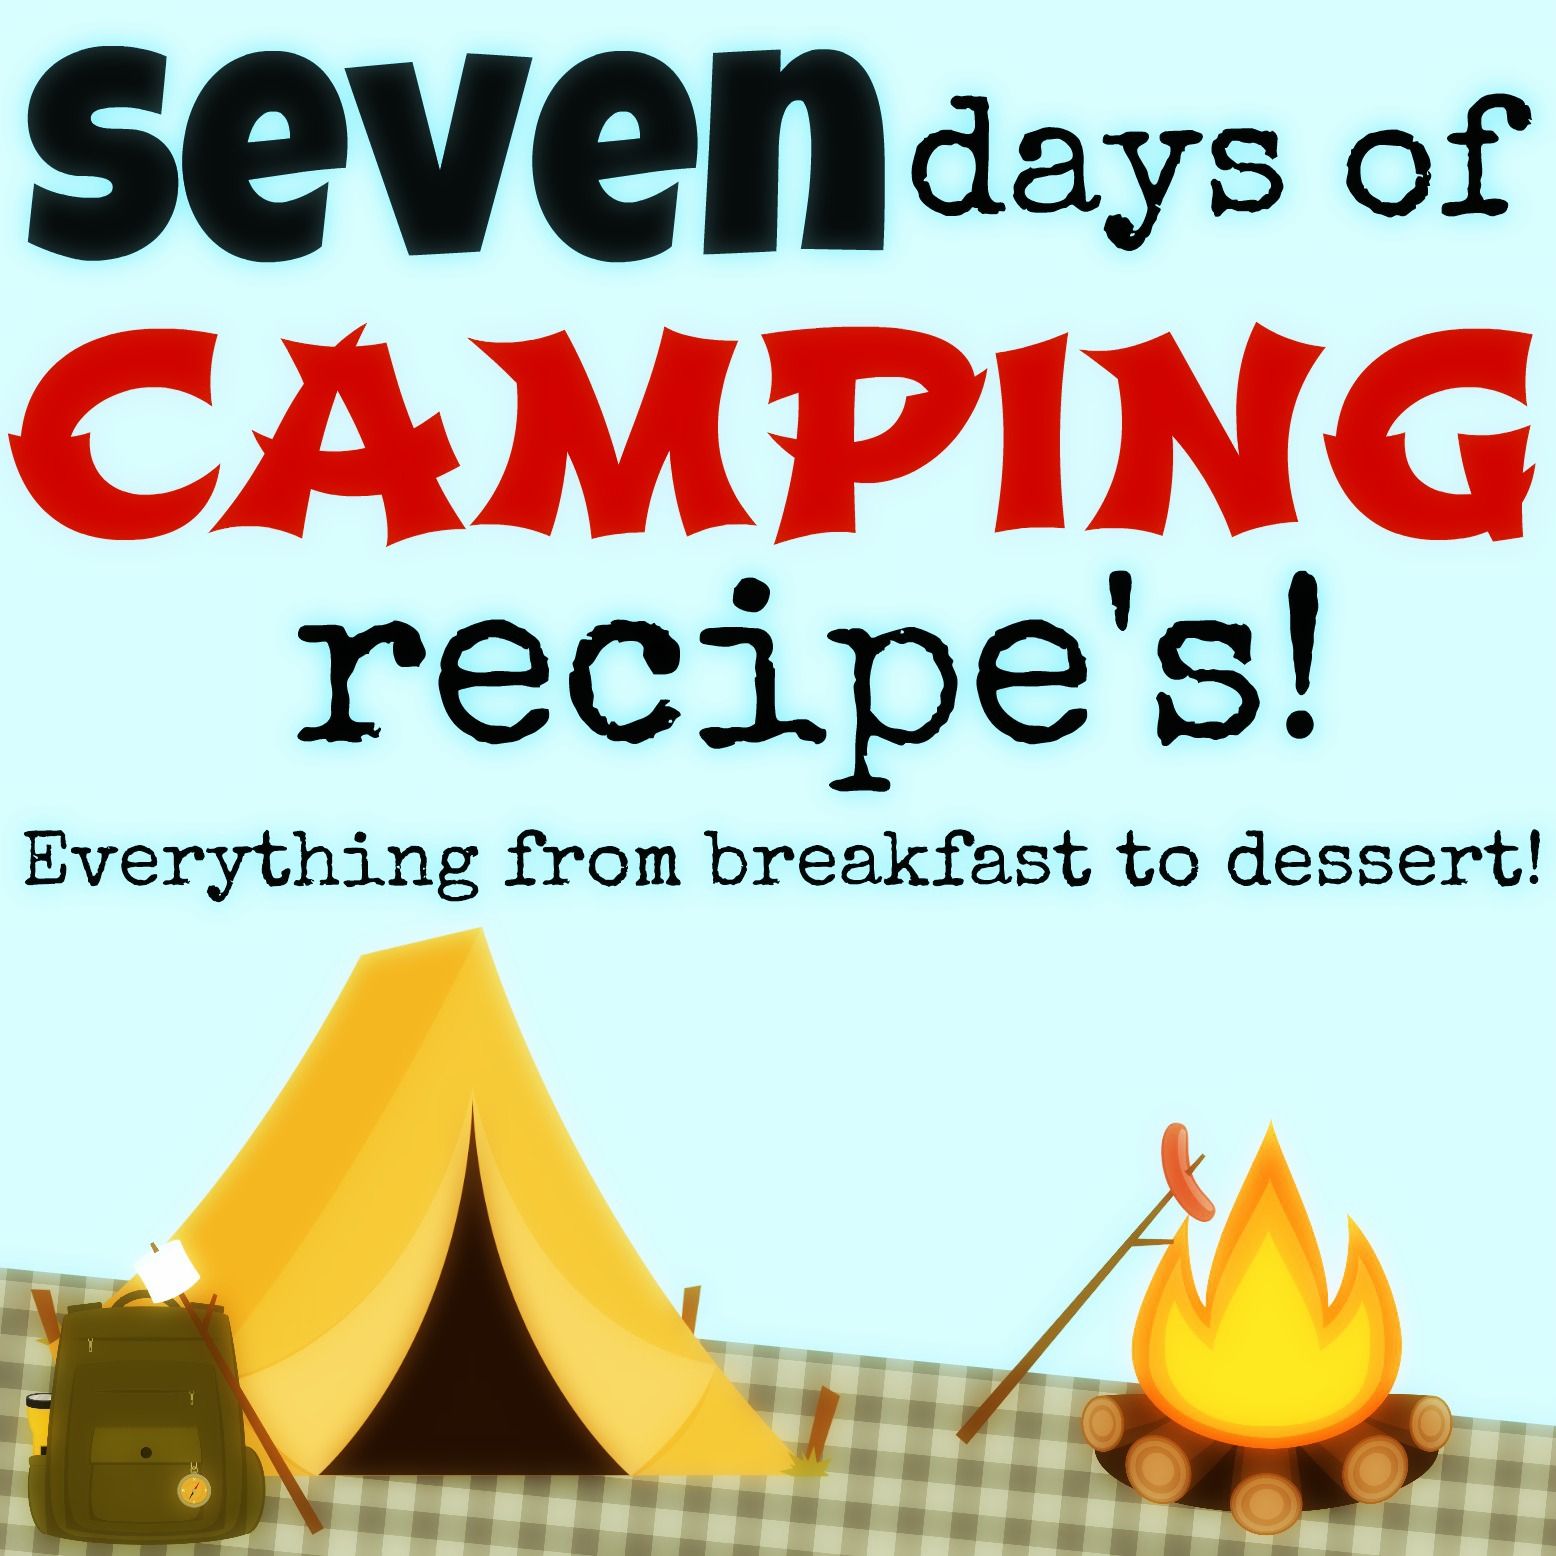 7 days of camping recipe's